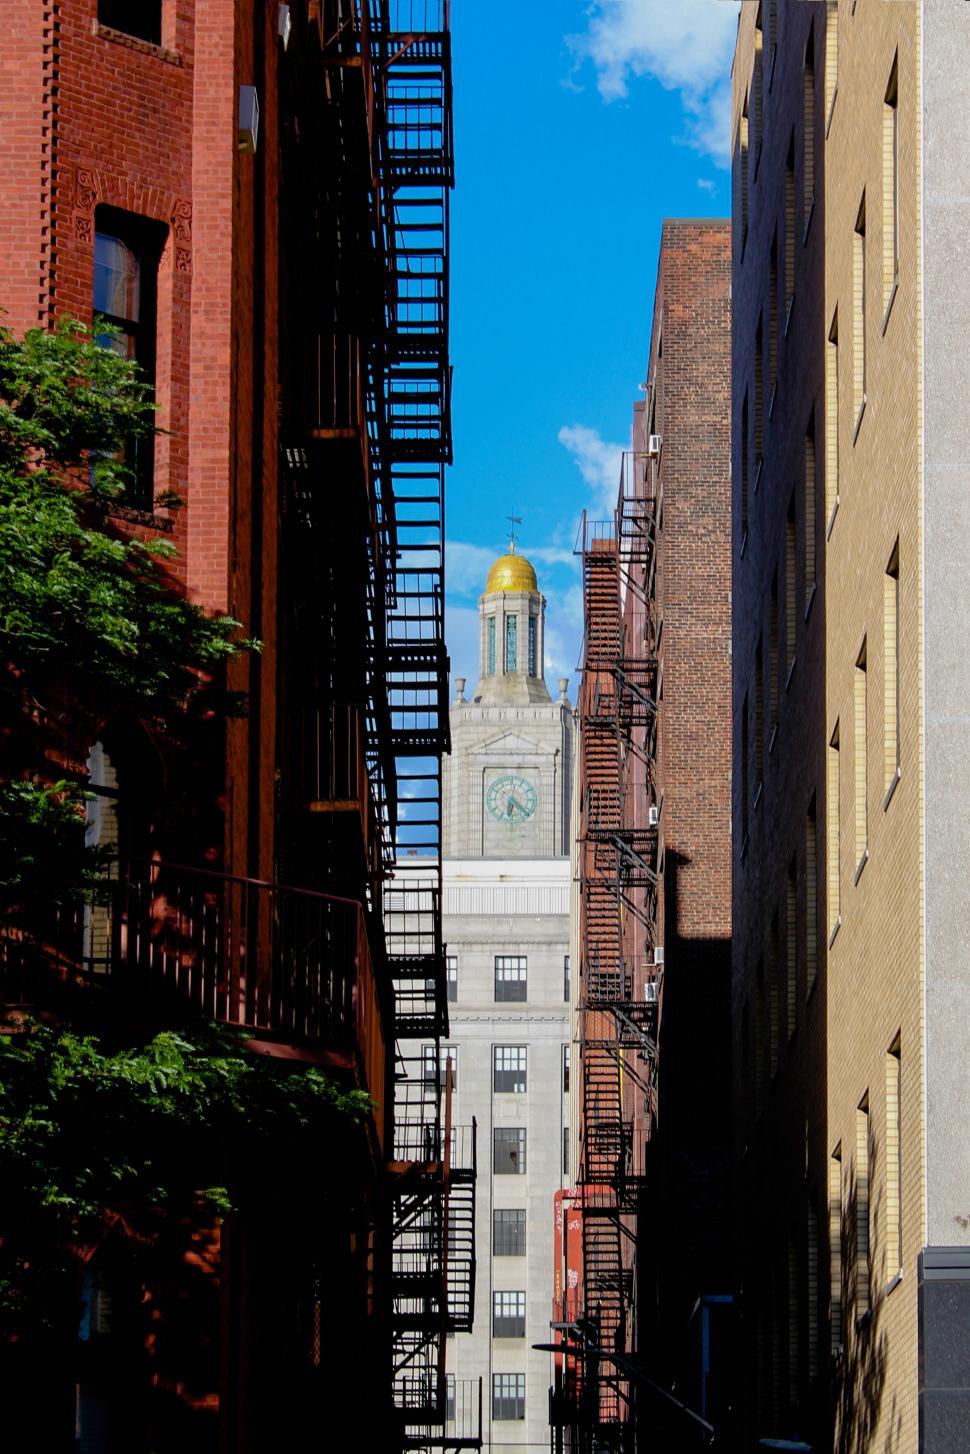 Free Image of Narrow alley with a view of a clock tower 